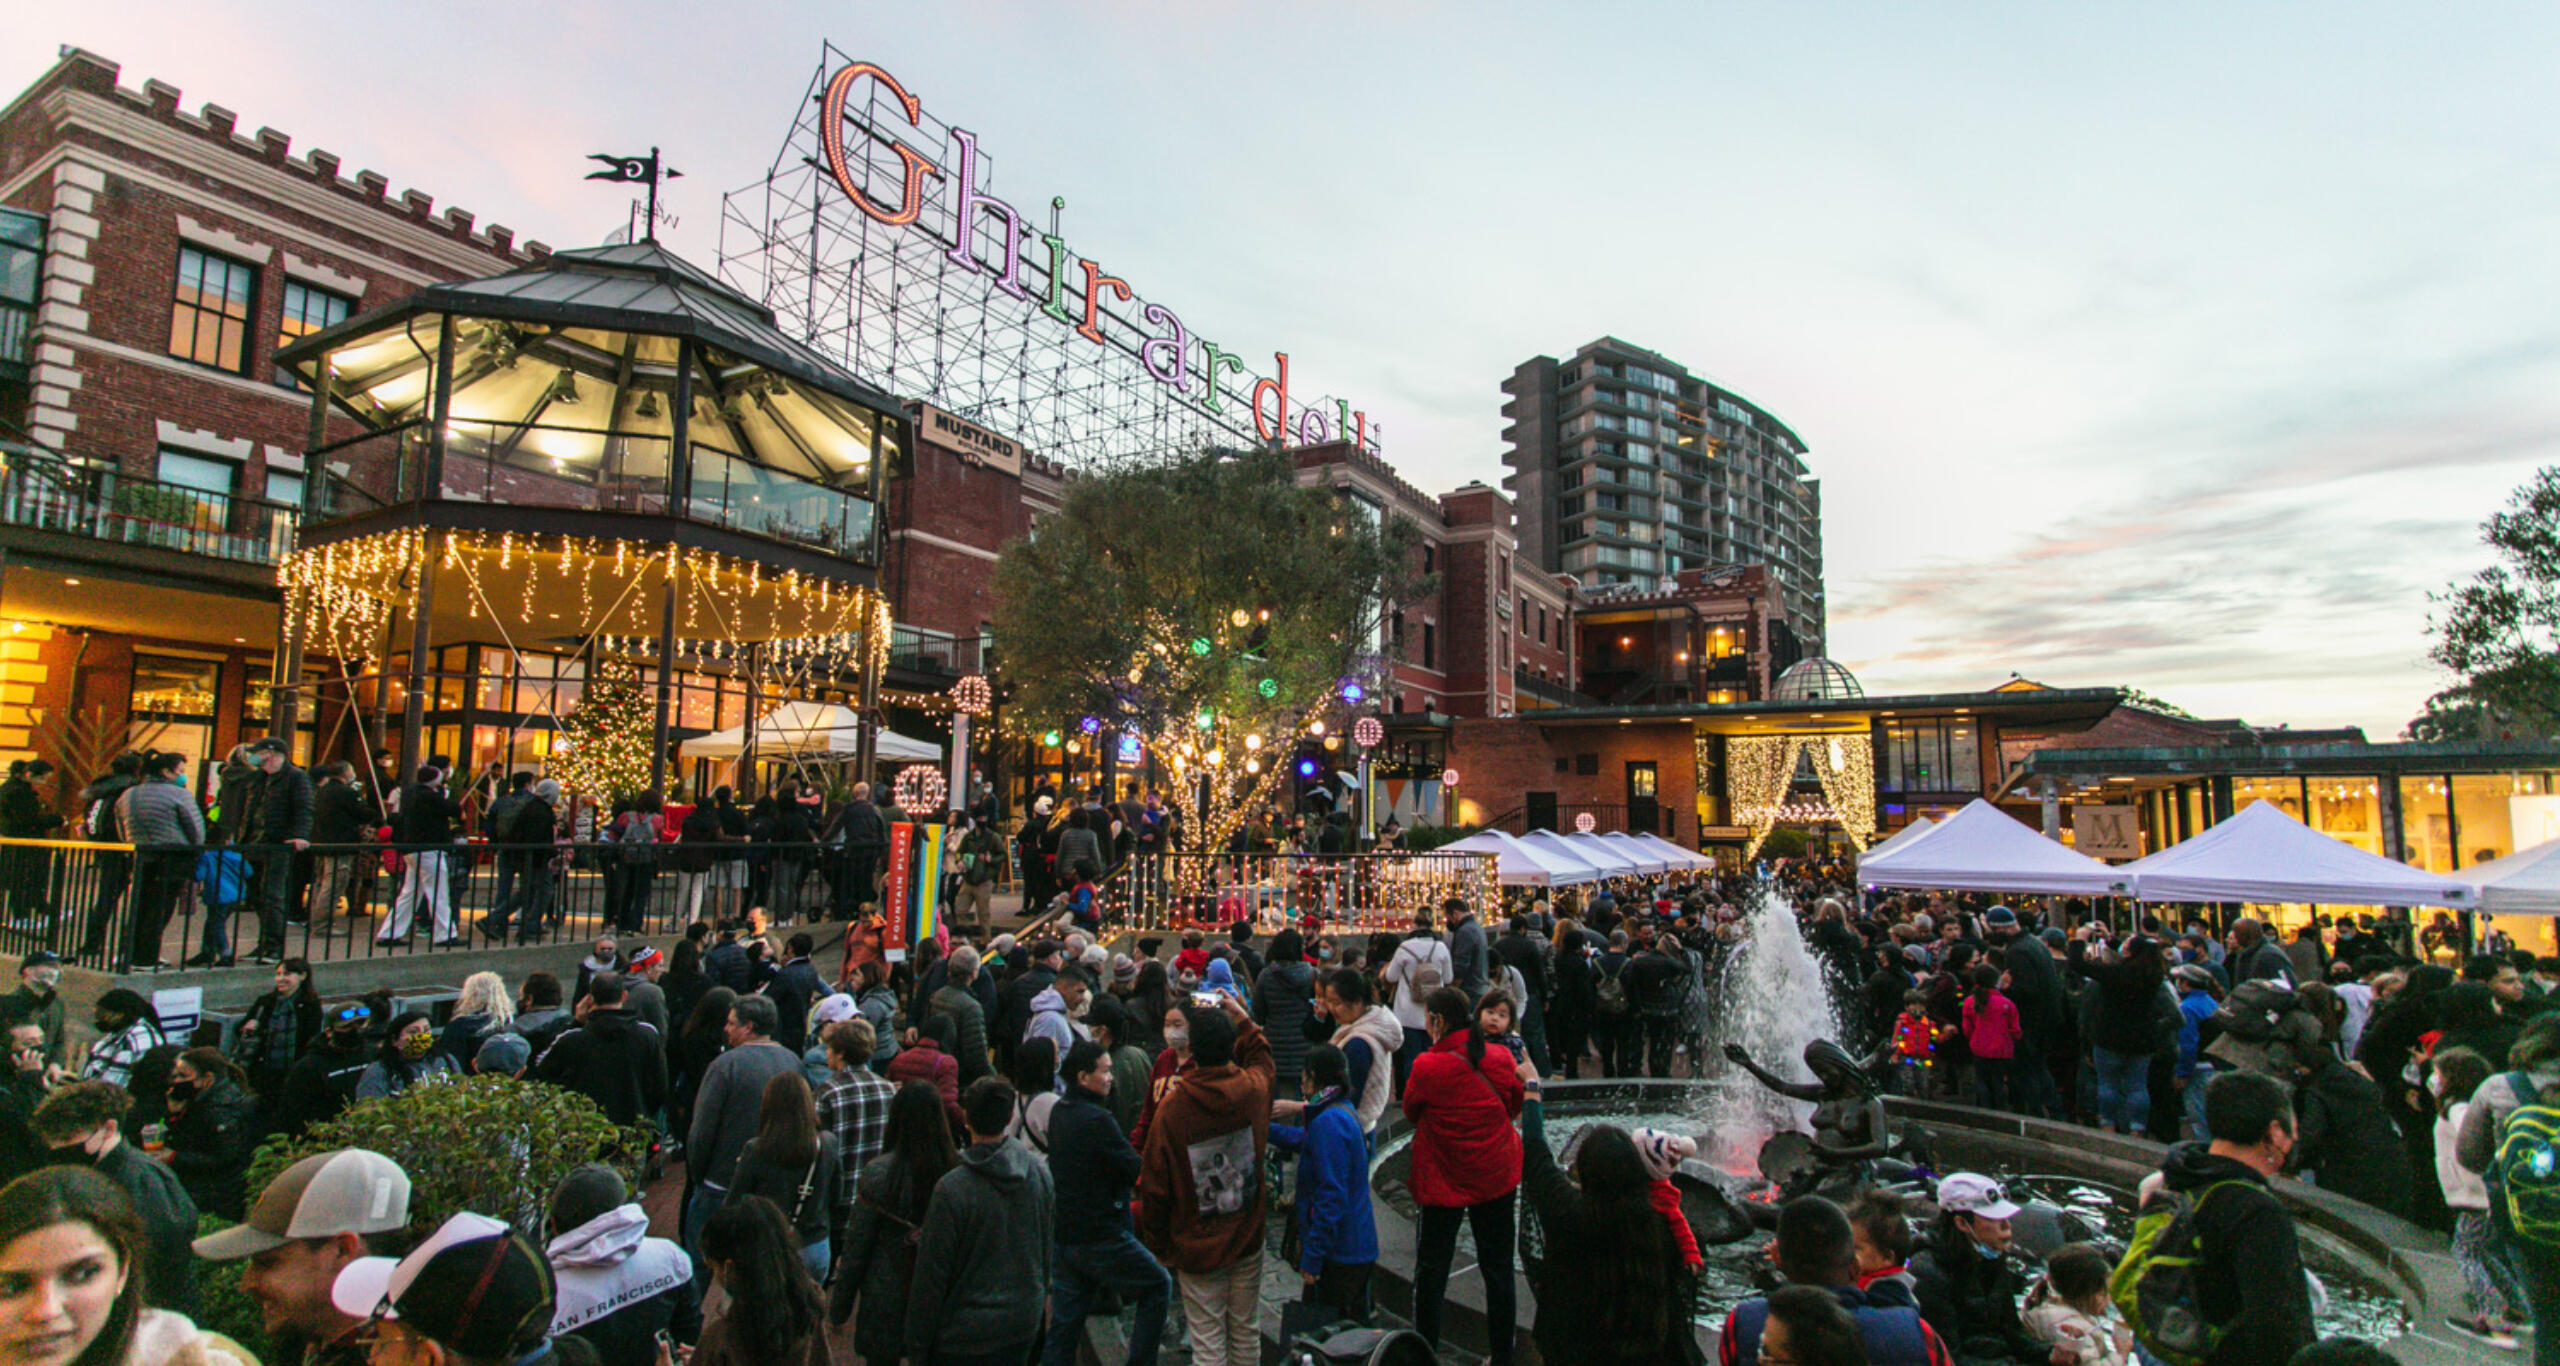 A large crowd of visitors at Ghirardelli Square's holiday celebration